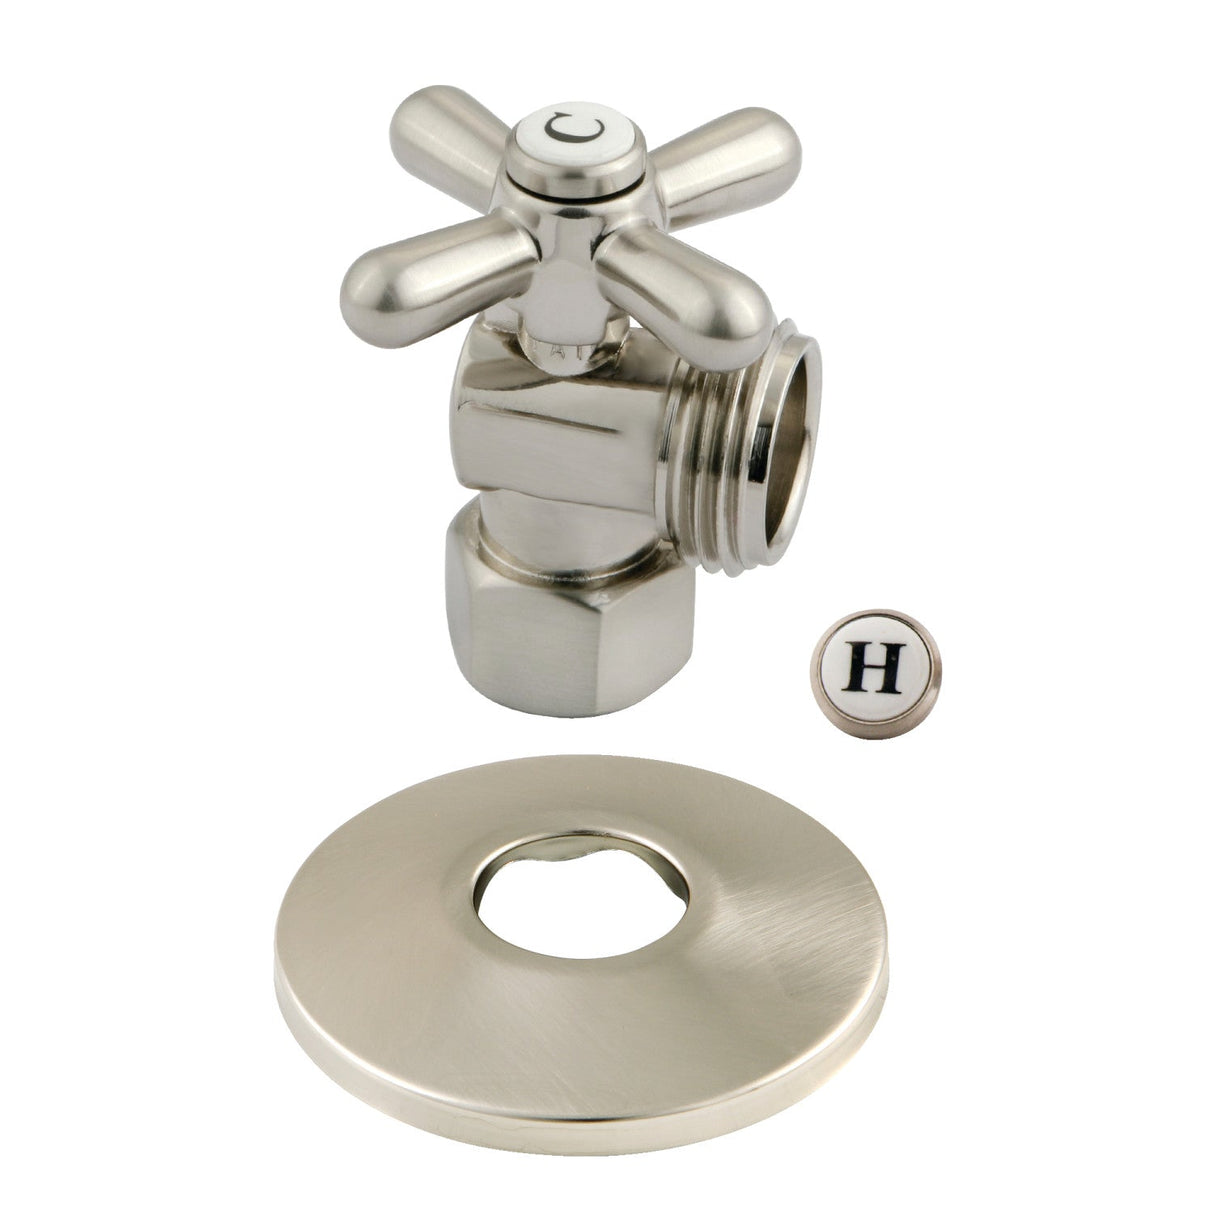 CC13008XK 1/2-Inch FIP x 3/4-Inch Hose Thread Quarter-Turn Angle Stop Valve with Flange, Brushed Nickel